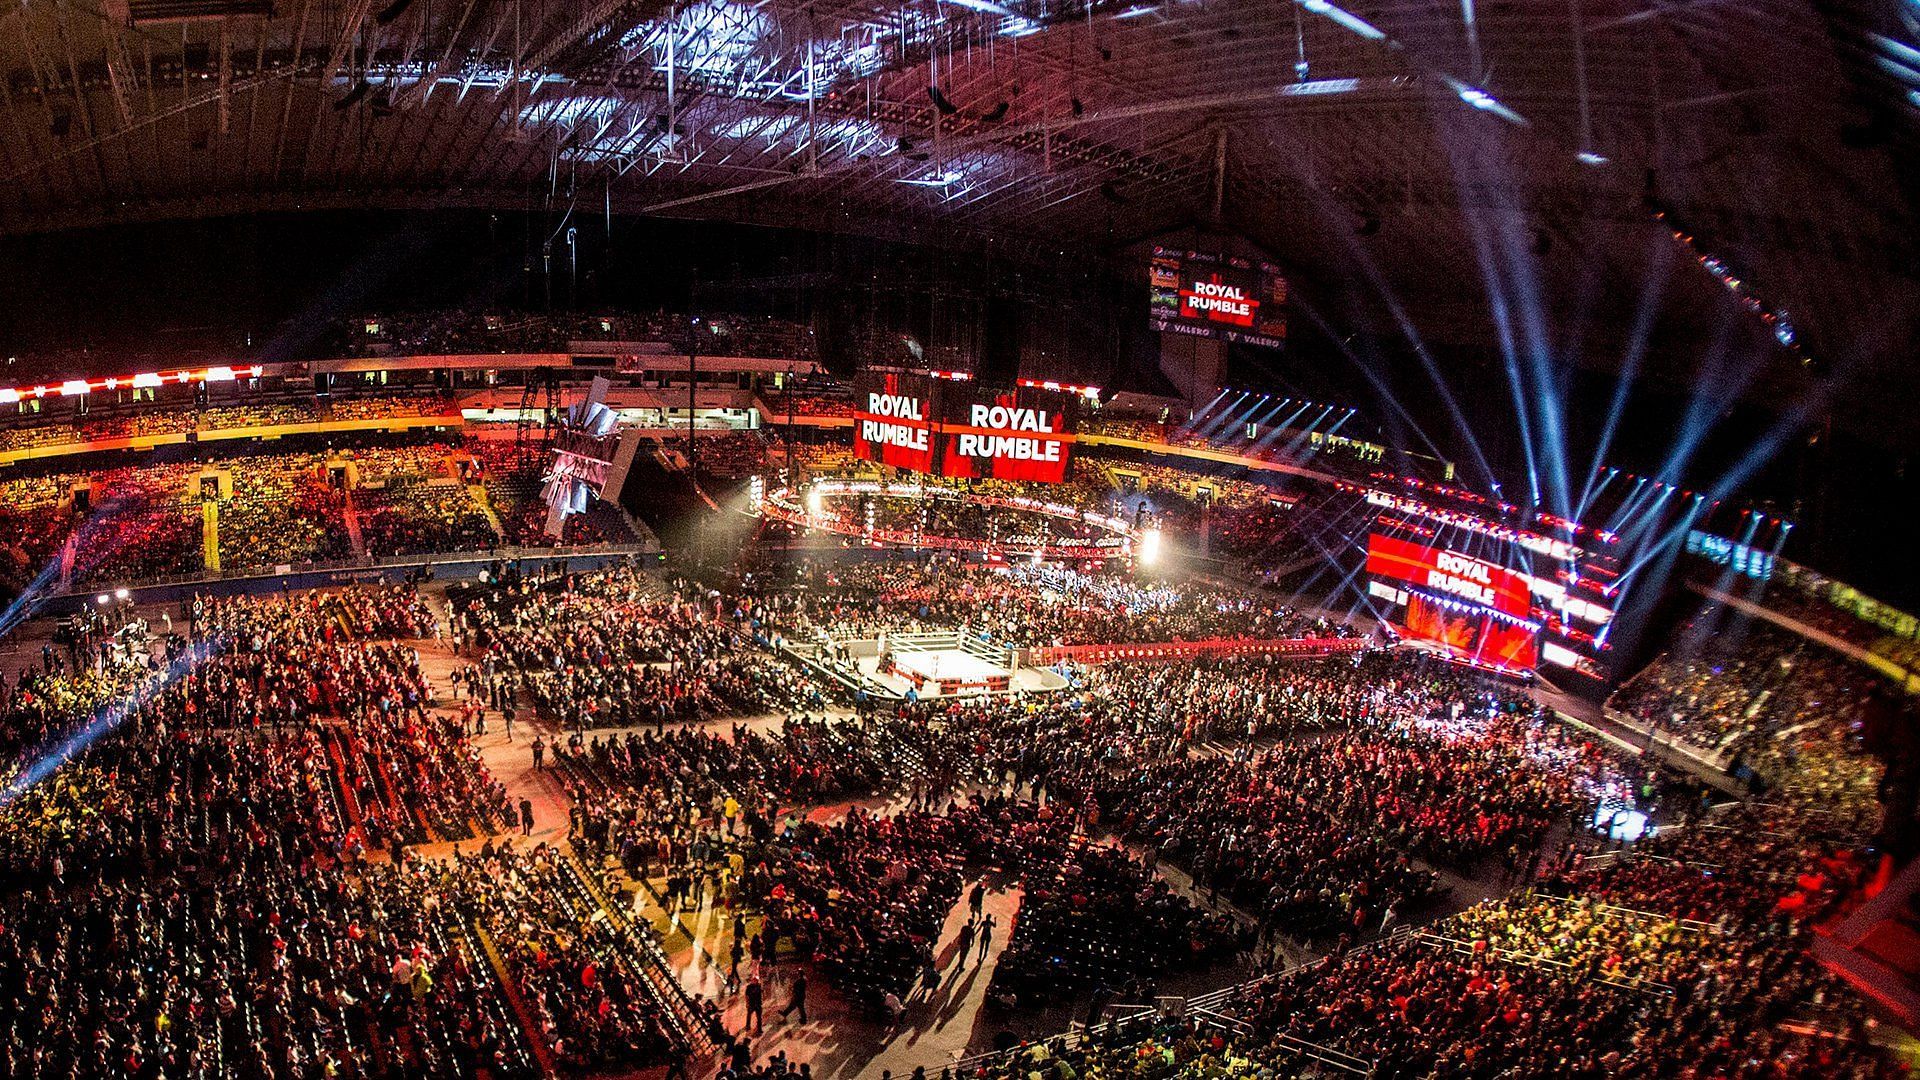 The WWE Universe packs a stadium for the Royal Rumble